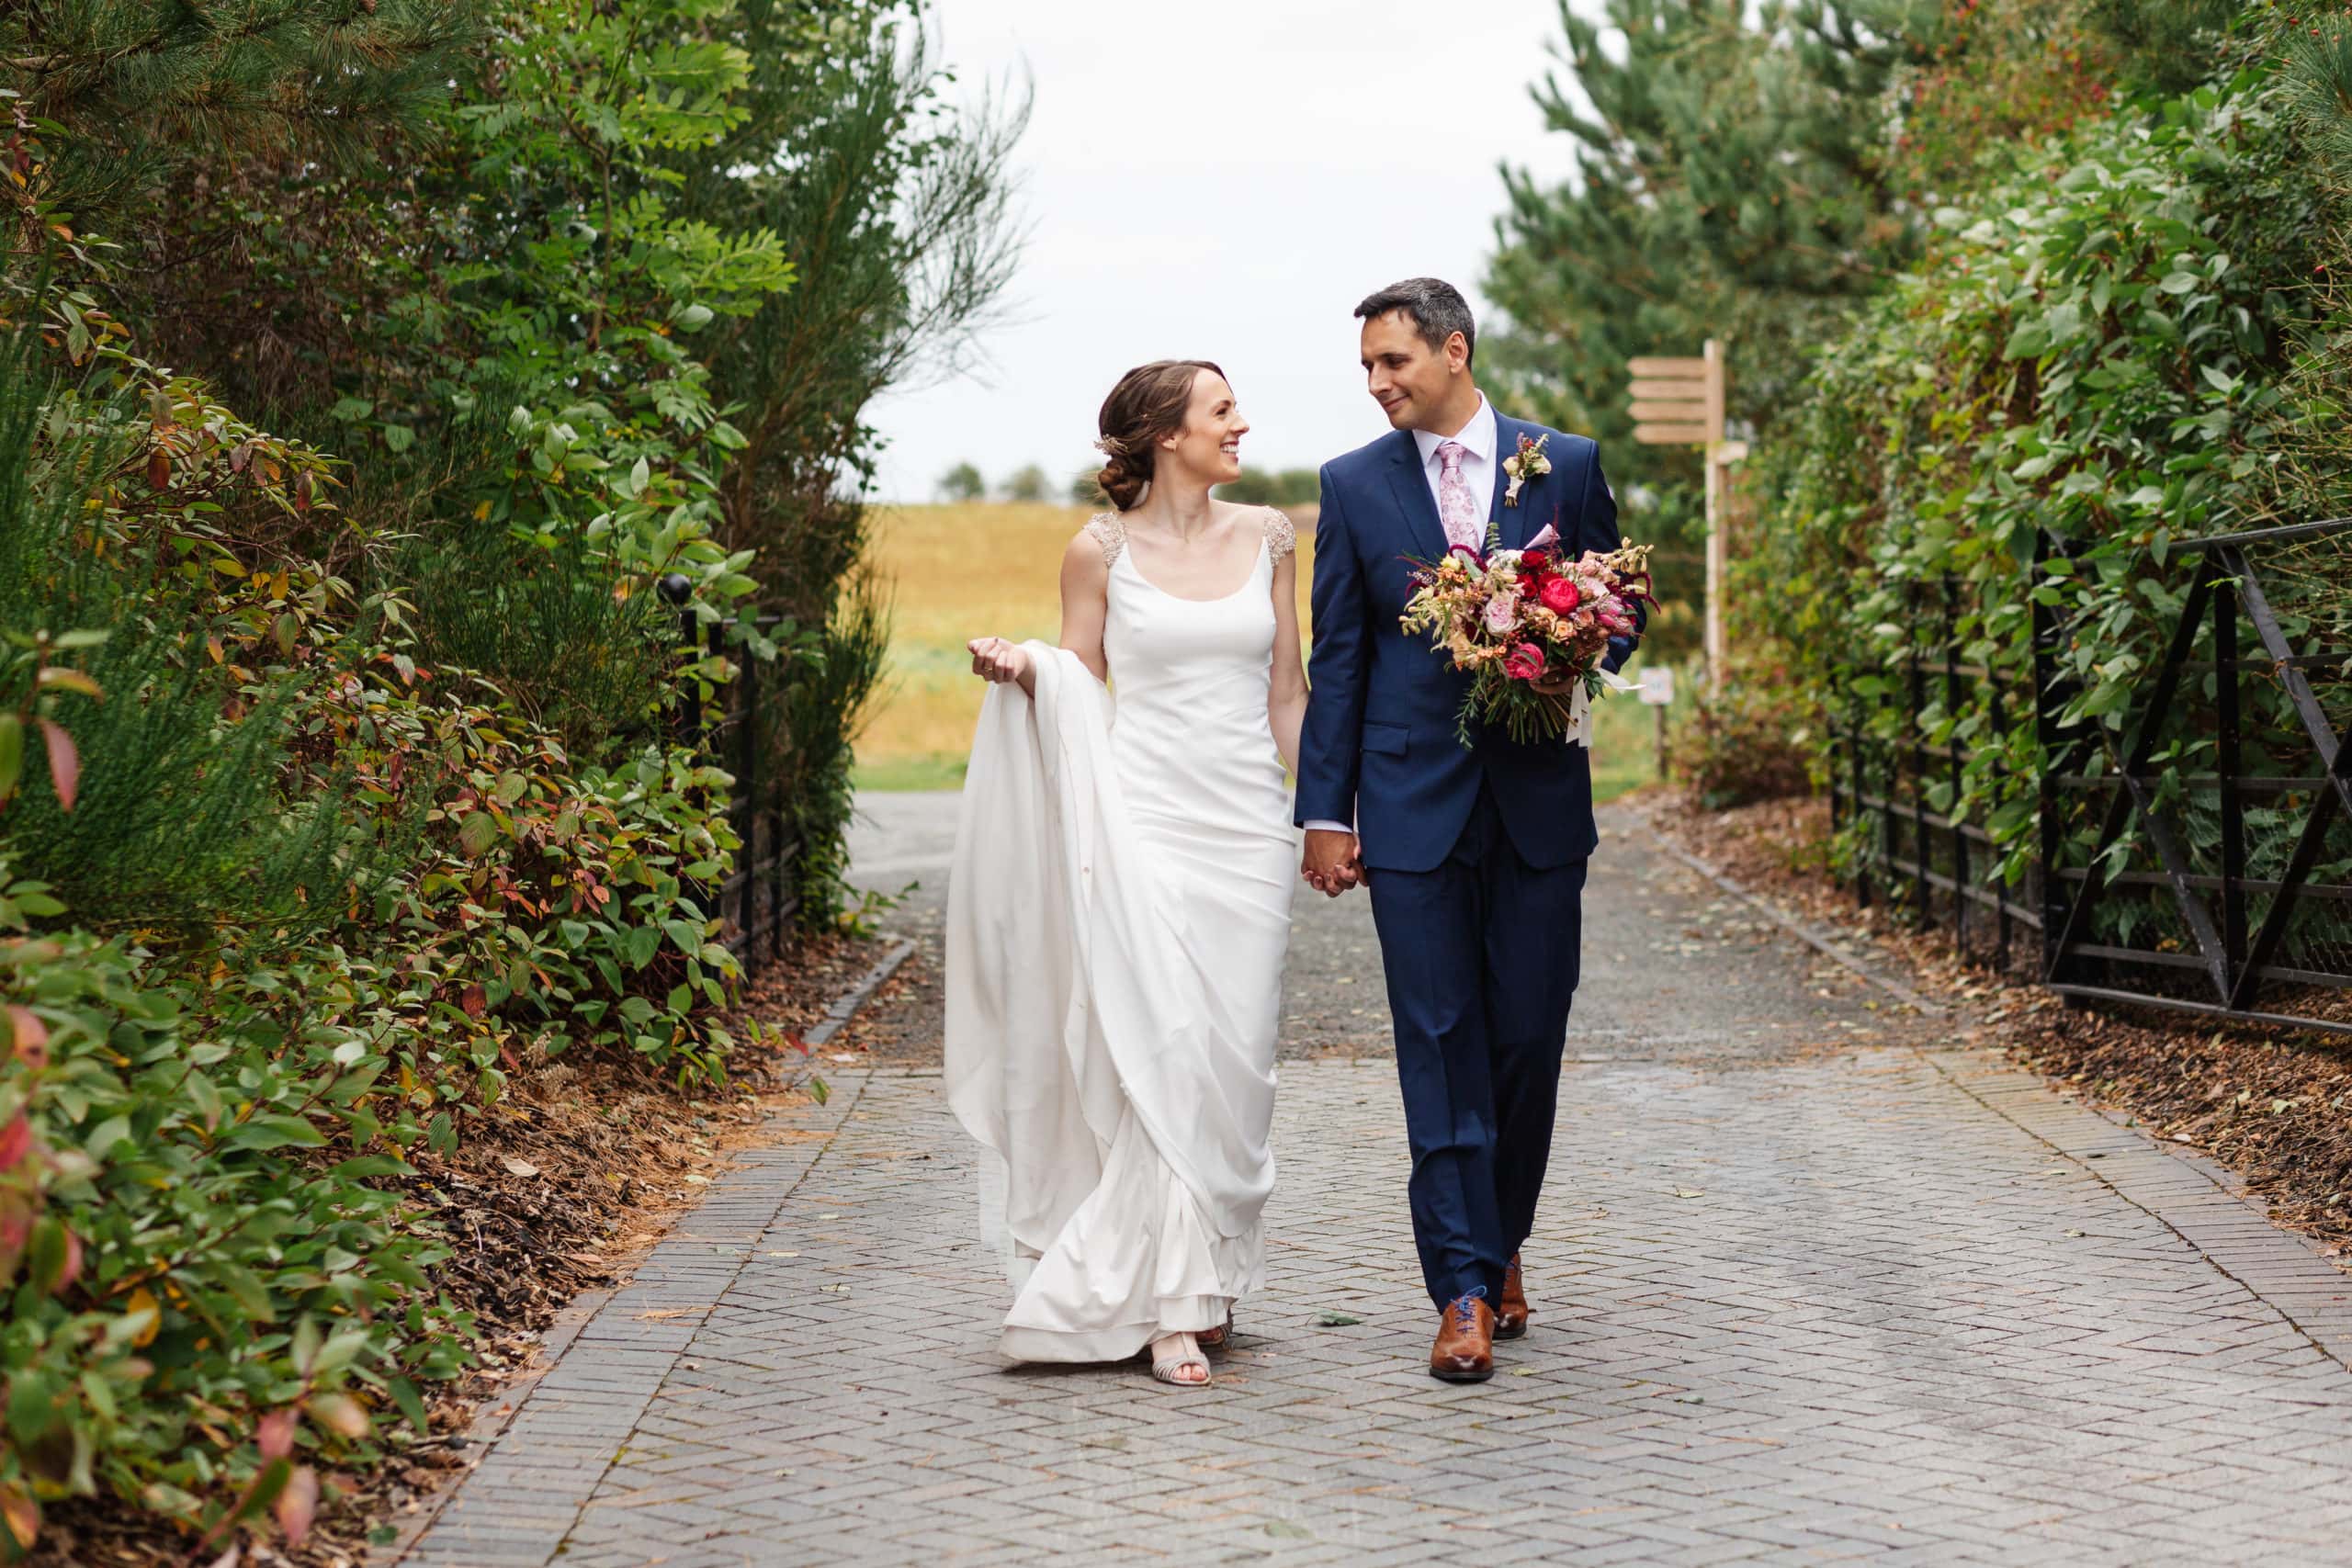 Candid moment between bride and groom holding hands and walking at Swallows Nest Barn